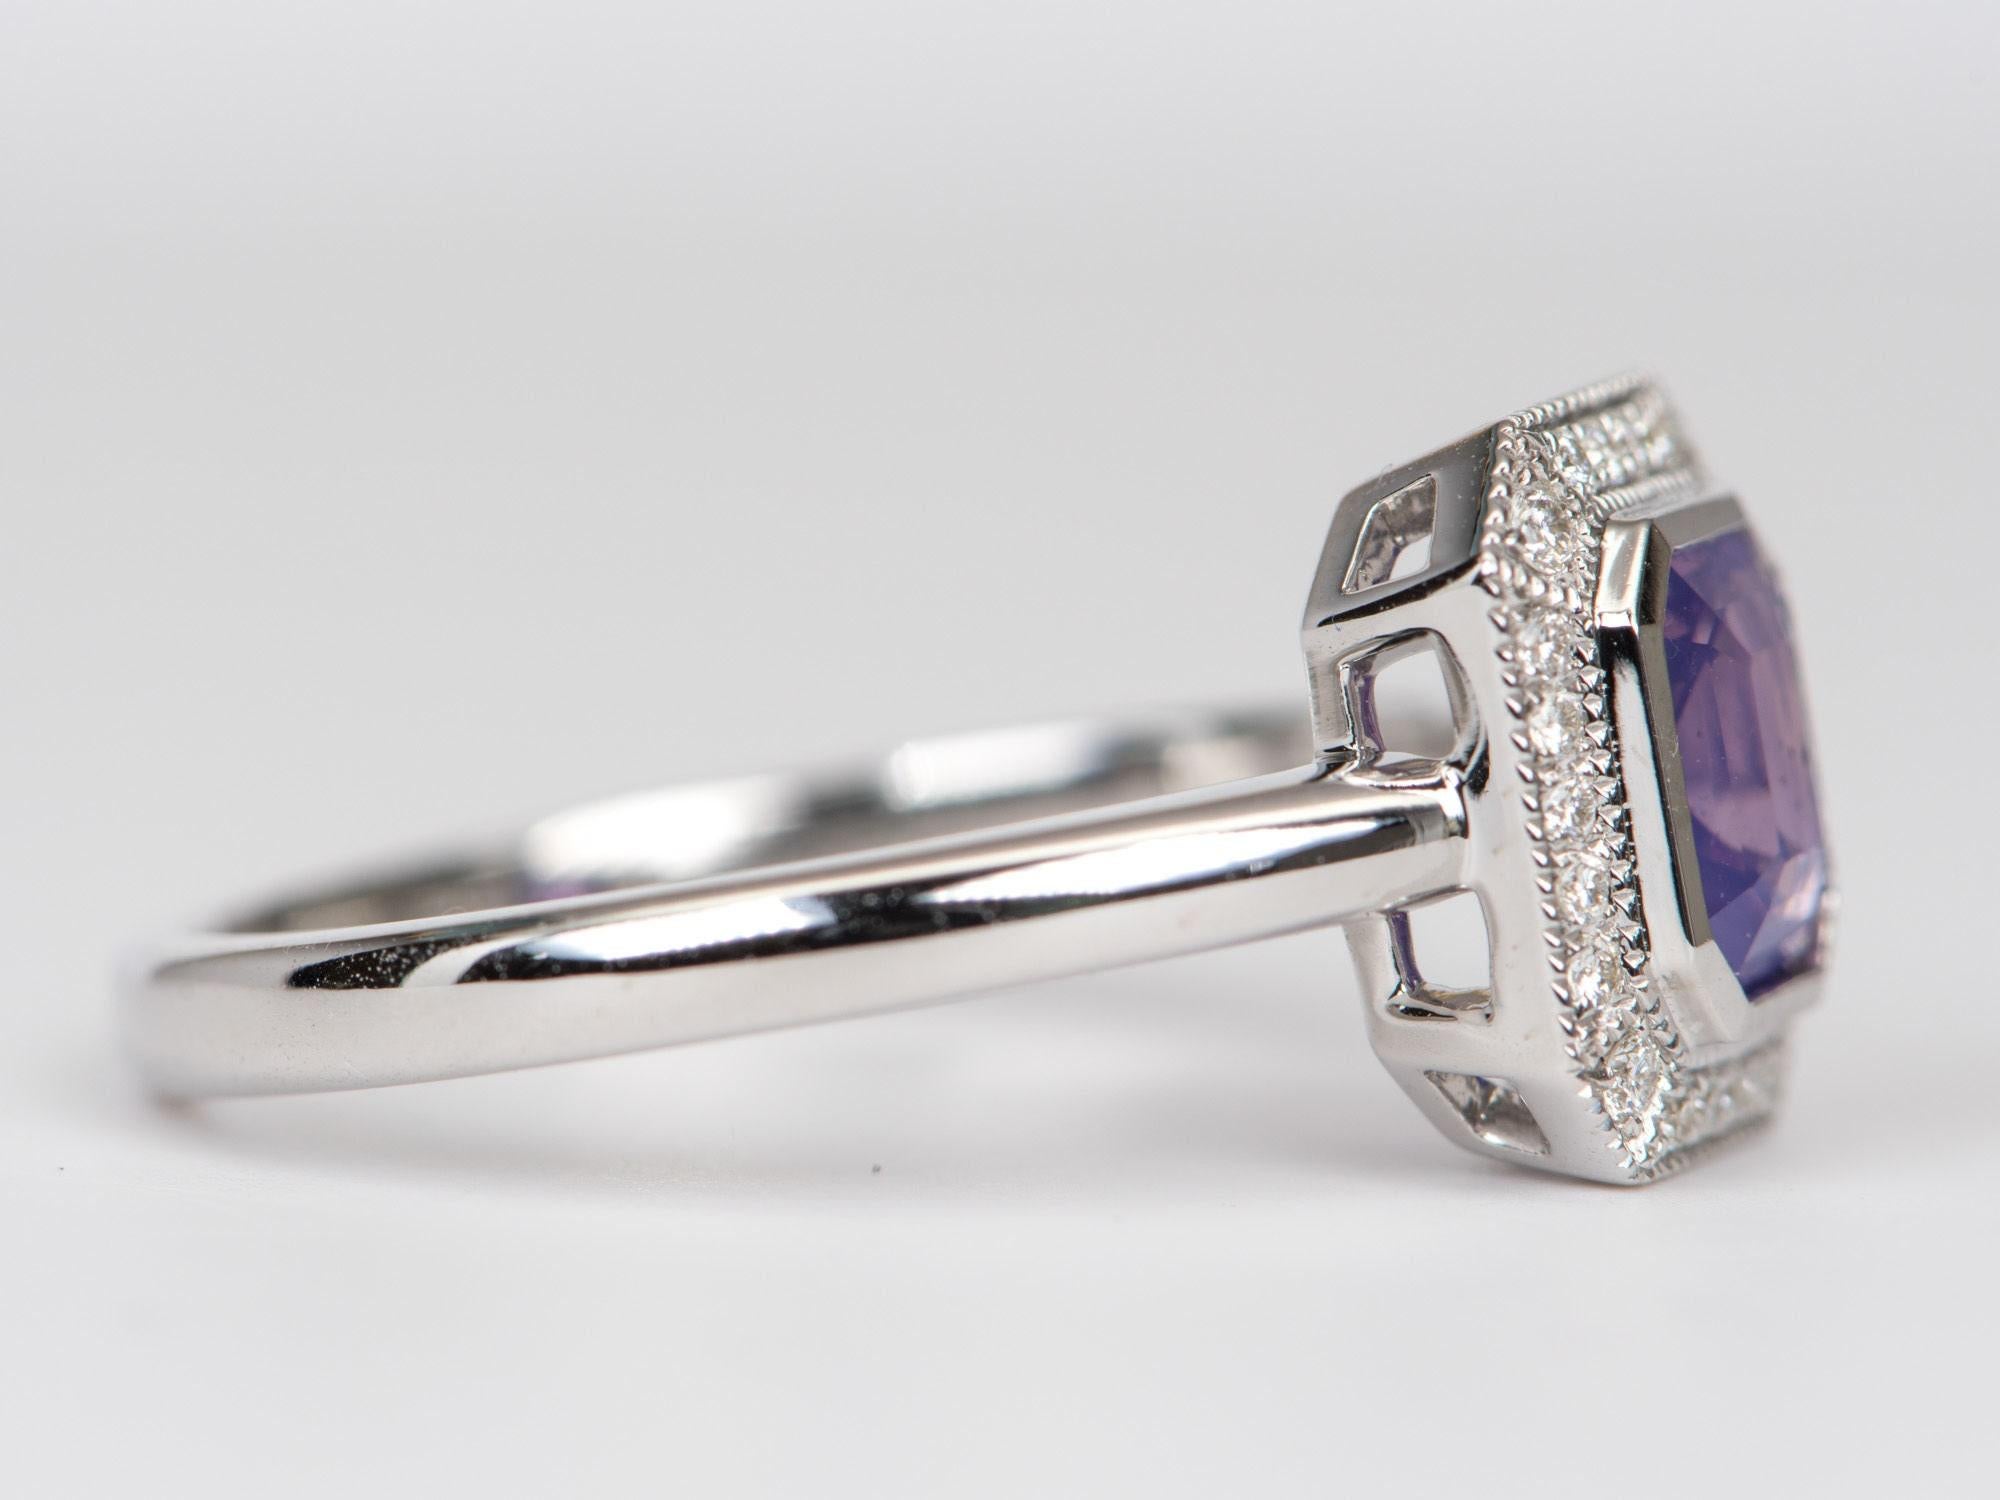 ♥  Solid 14K white gold ring set with a pinkish purple sapphire and a diamond halo
�♥  This is a very unique sapphire with a slight milkiness, presenting an opalescent effect
♥  The sapphire has some black inclusions. This is clearly shown in the